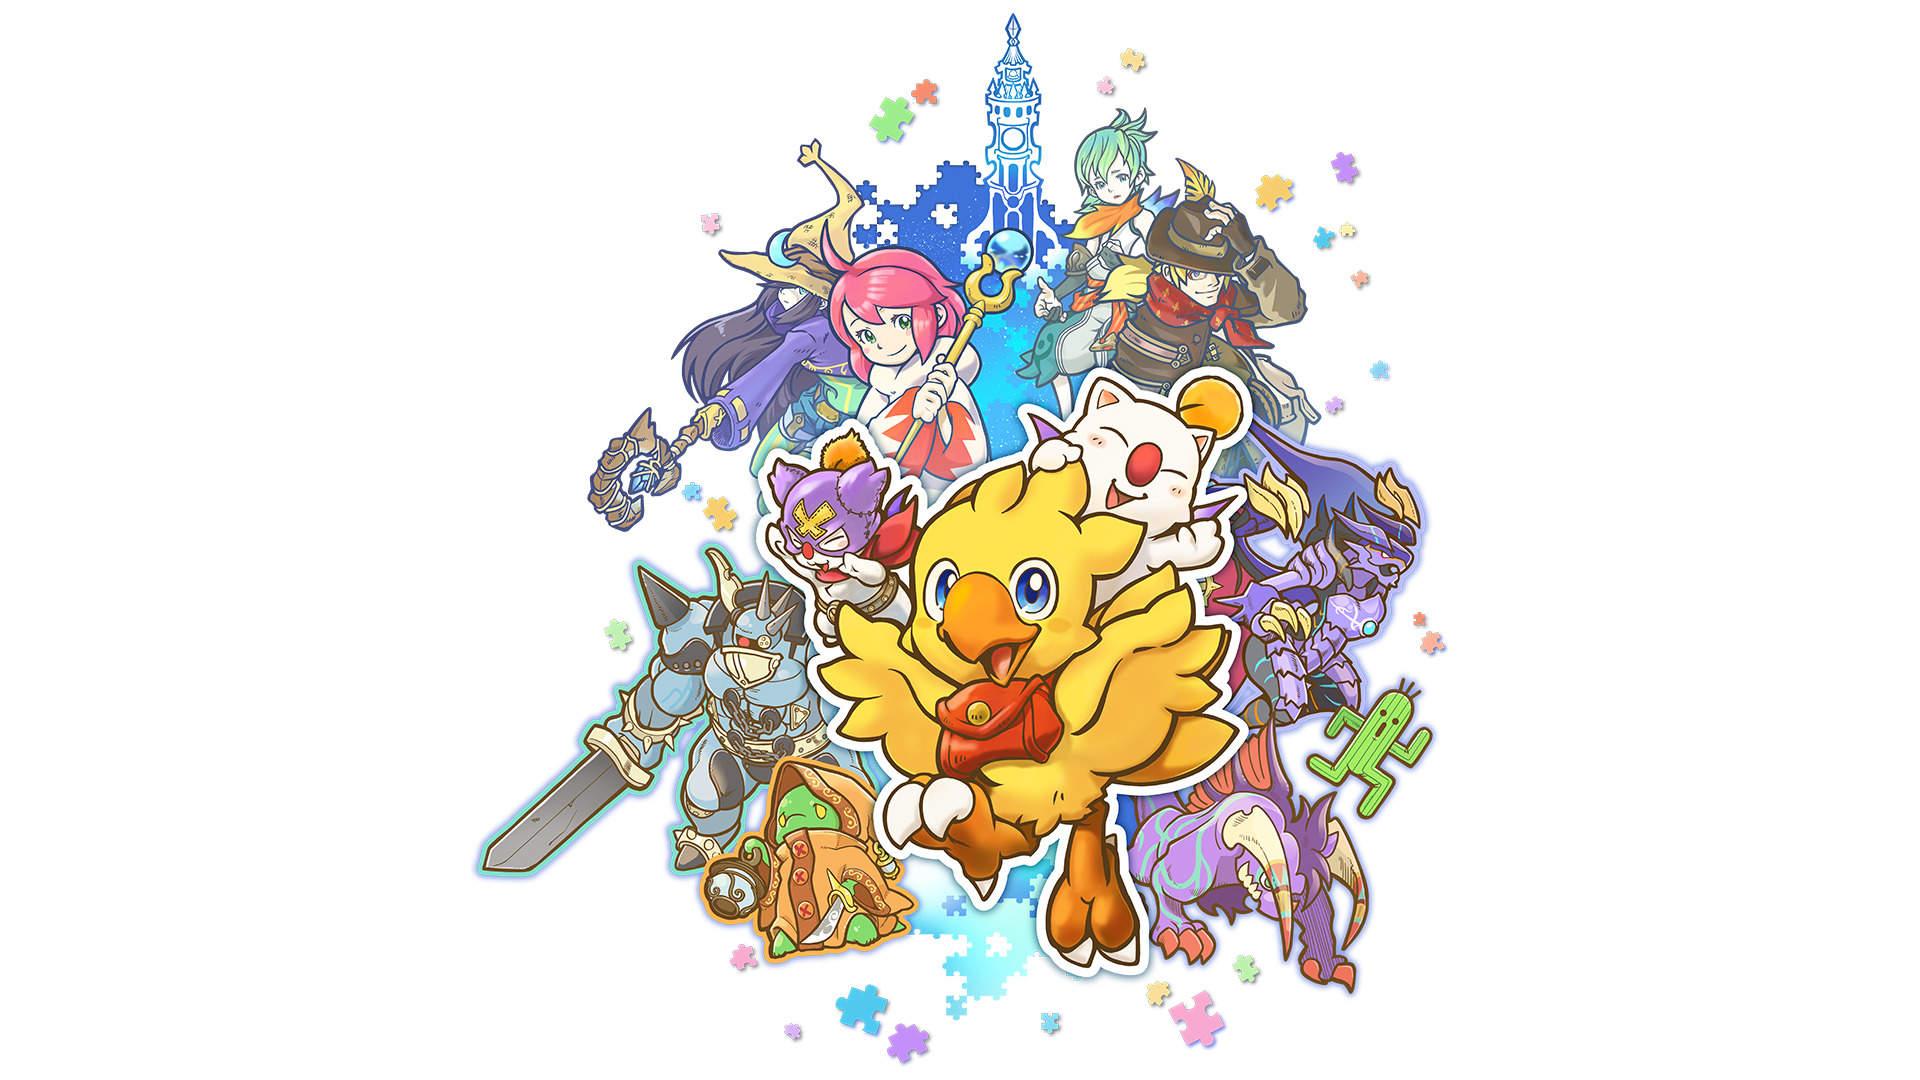 SQUARE ENIX's Mystery Dungeon EVERY BUDDY!